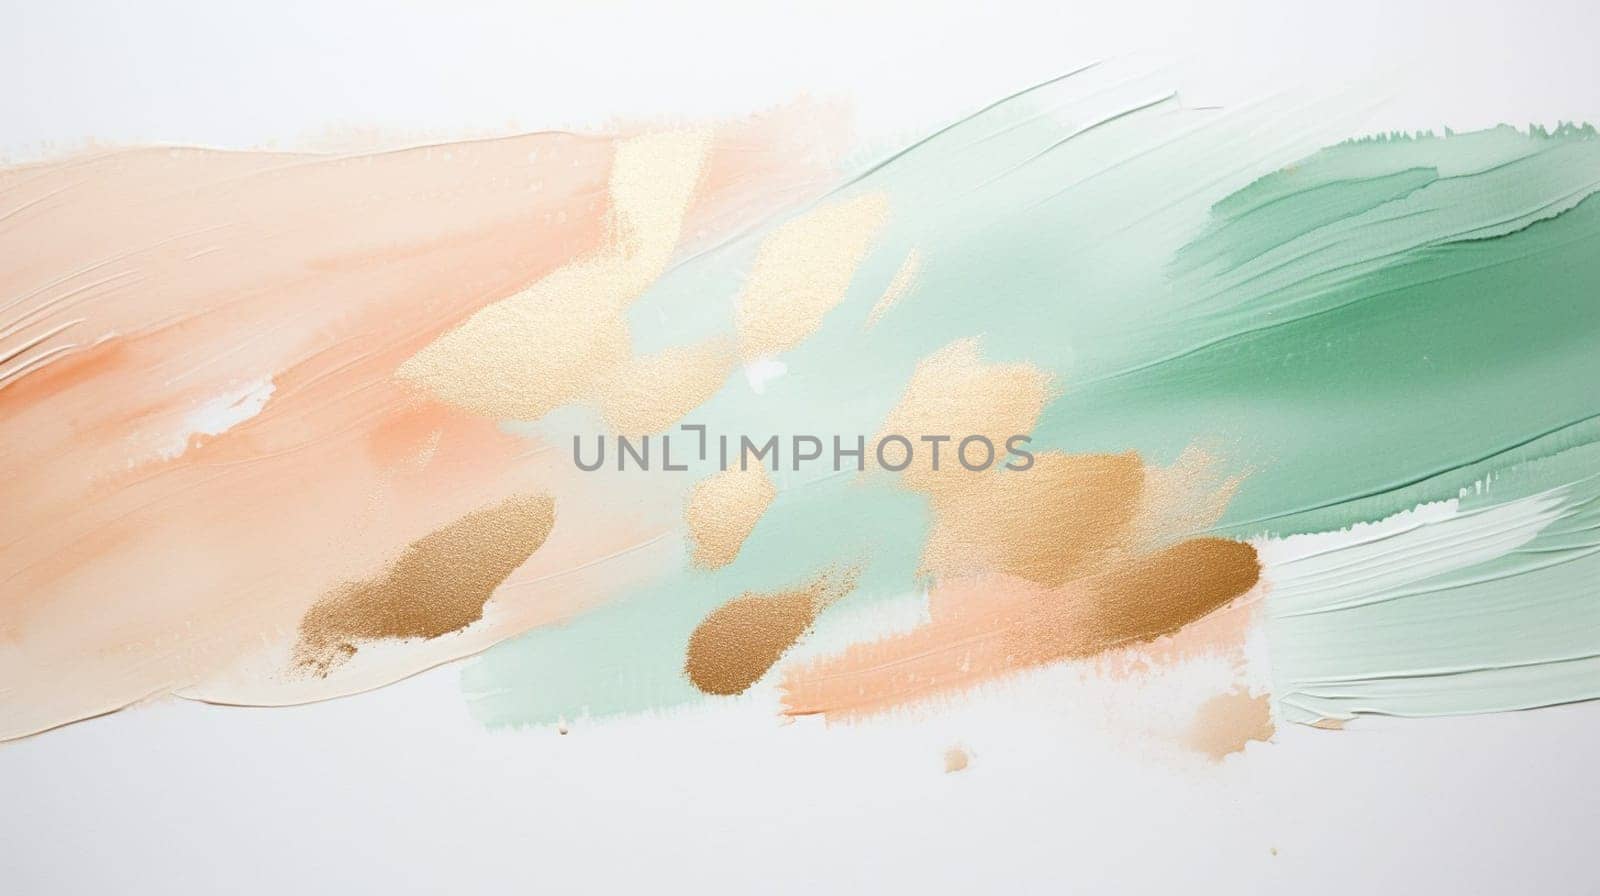 An abstract painting with gentle strokes of pastel green, peach, and gold hues blending softly on a textured canvas, evoking a sense of calmness. High quality photo